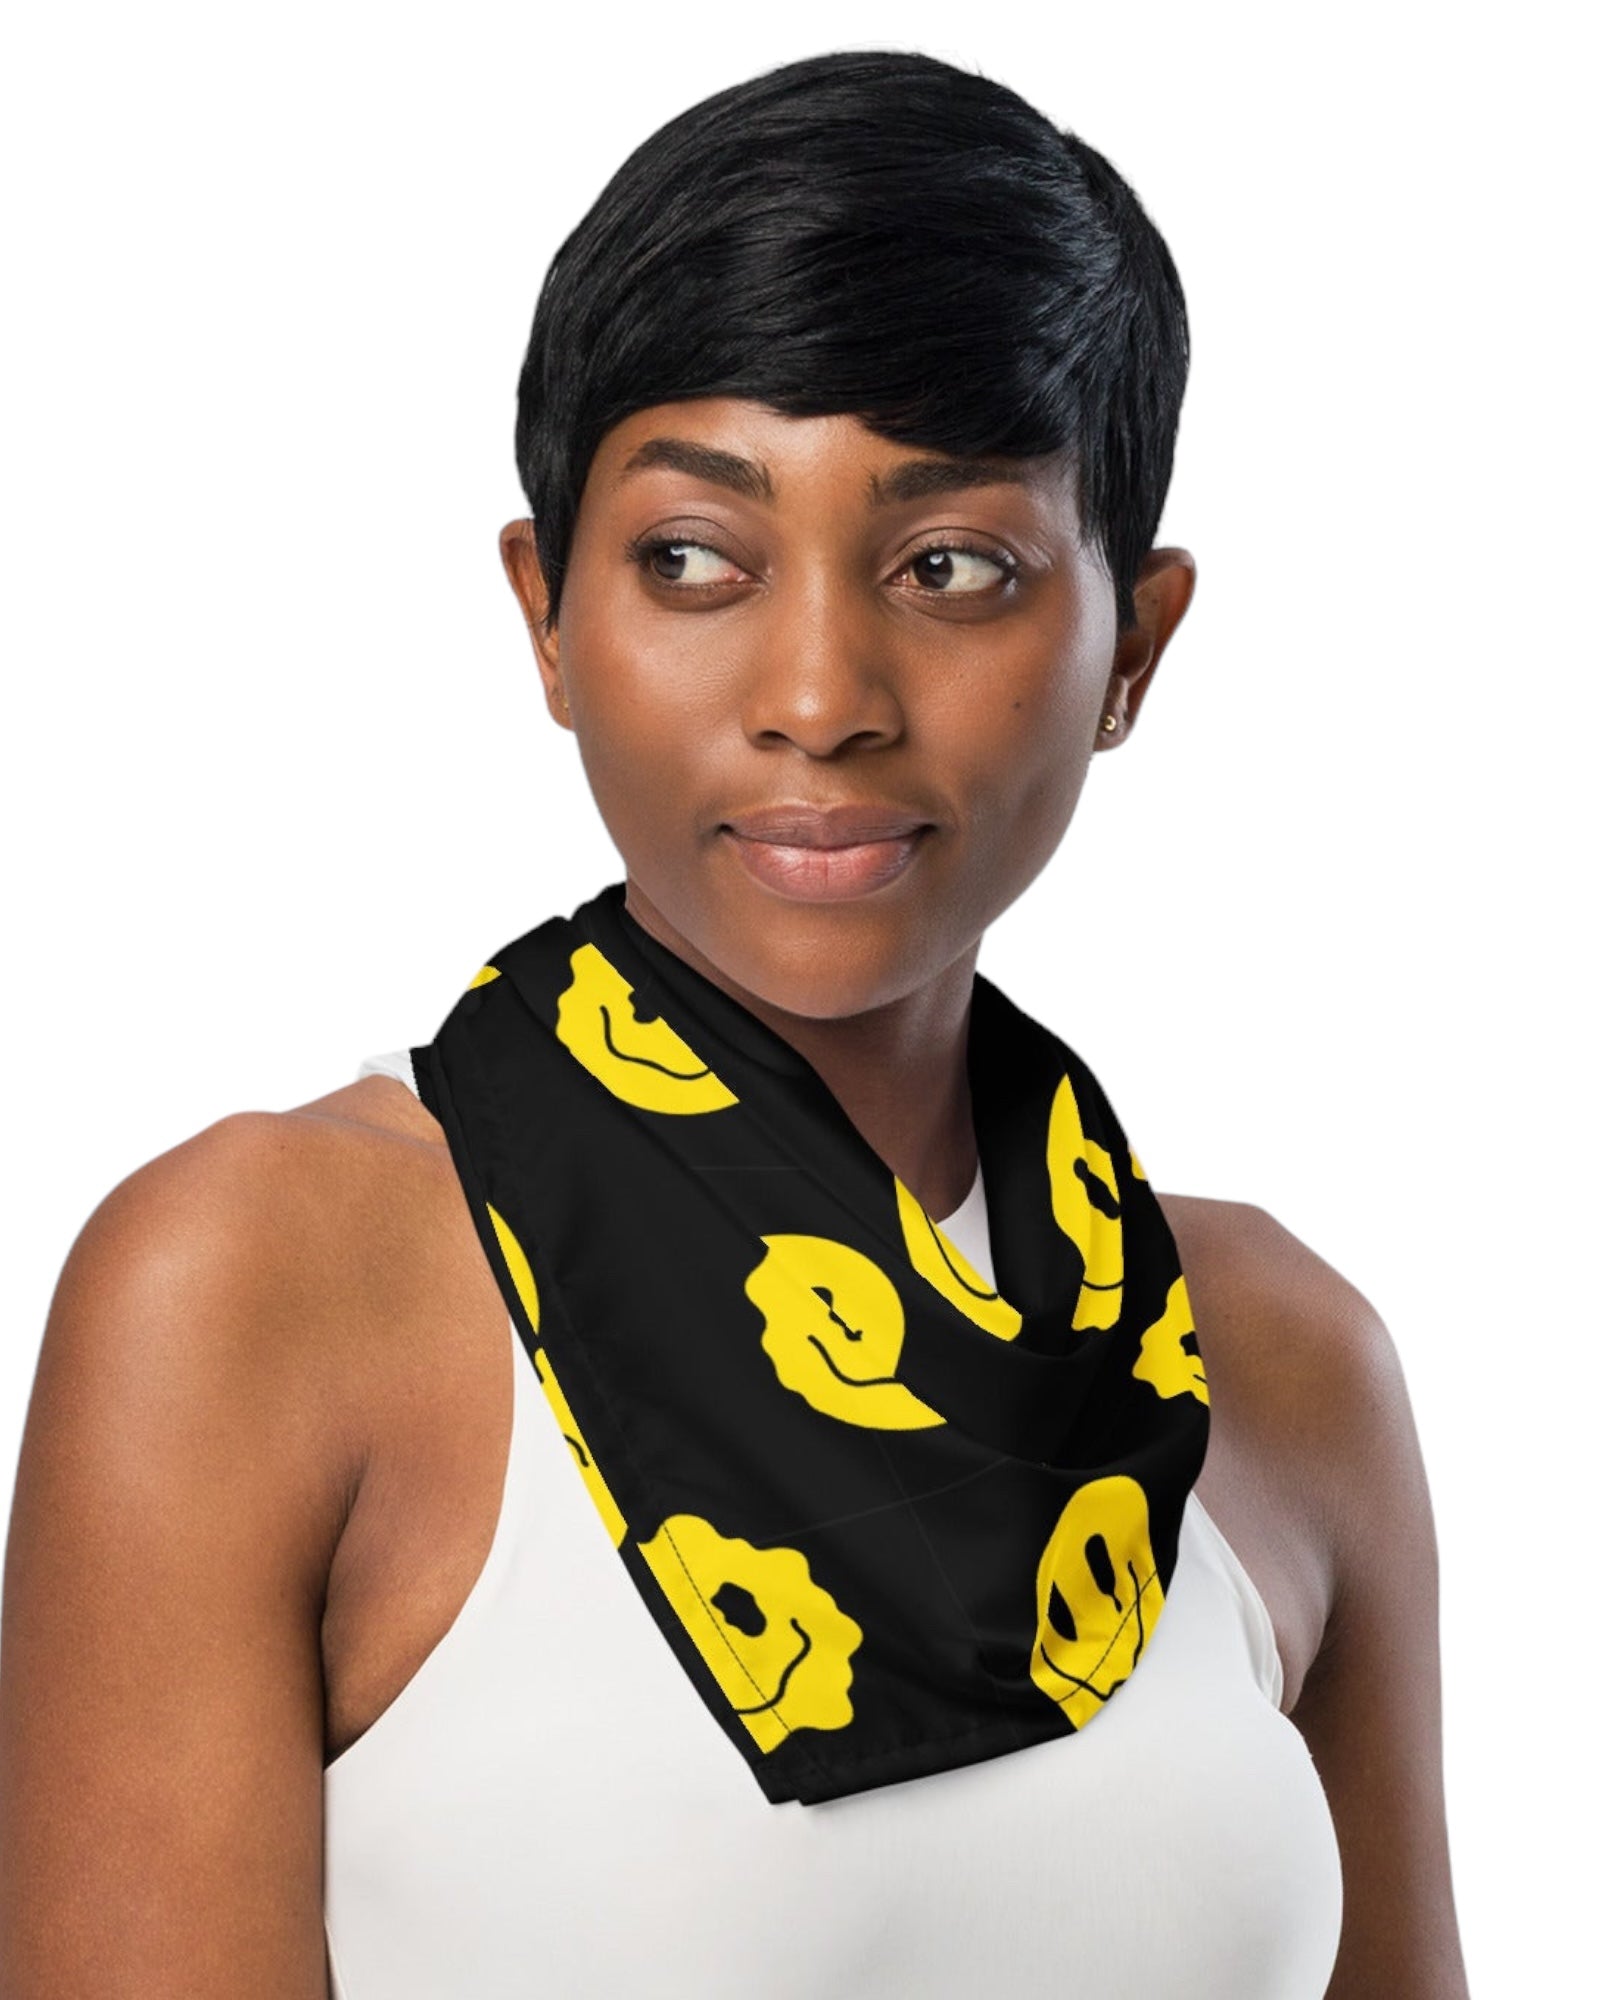 Woman wearing the Trippie Bandana around her neck - Features a vibrant yellow smiley face pattern on a black background, adding a bold touch to her rave outfit.